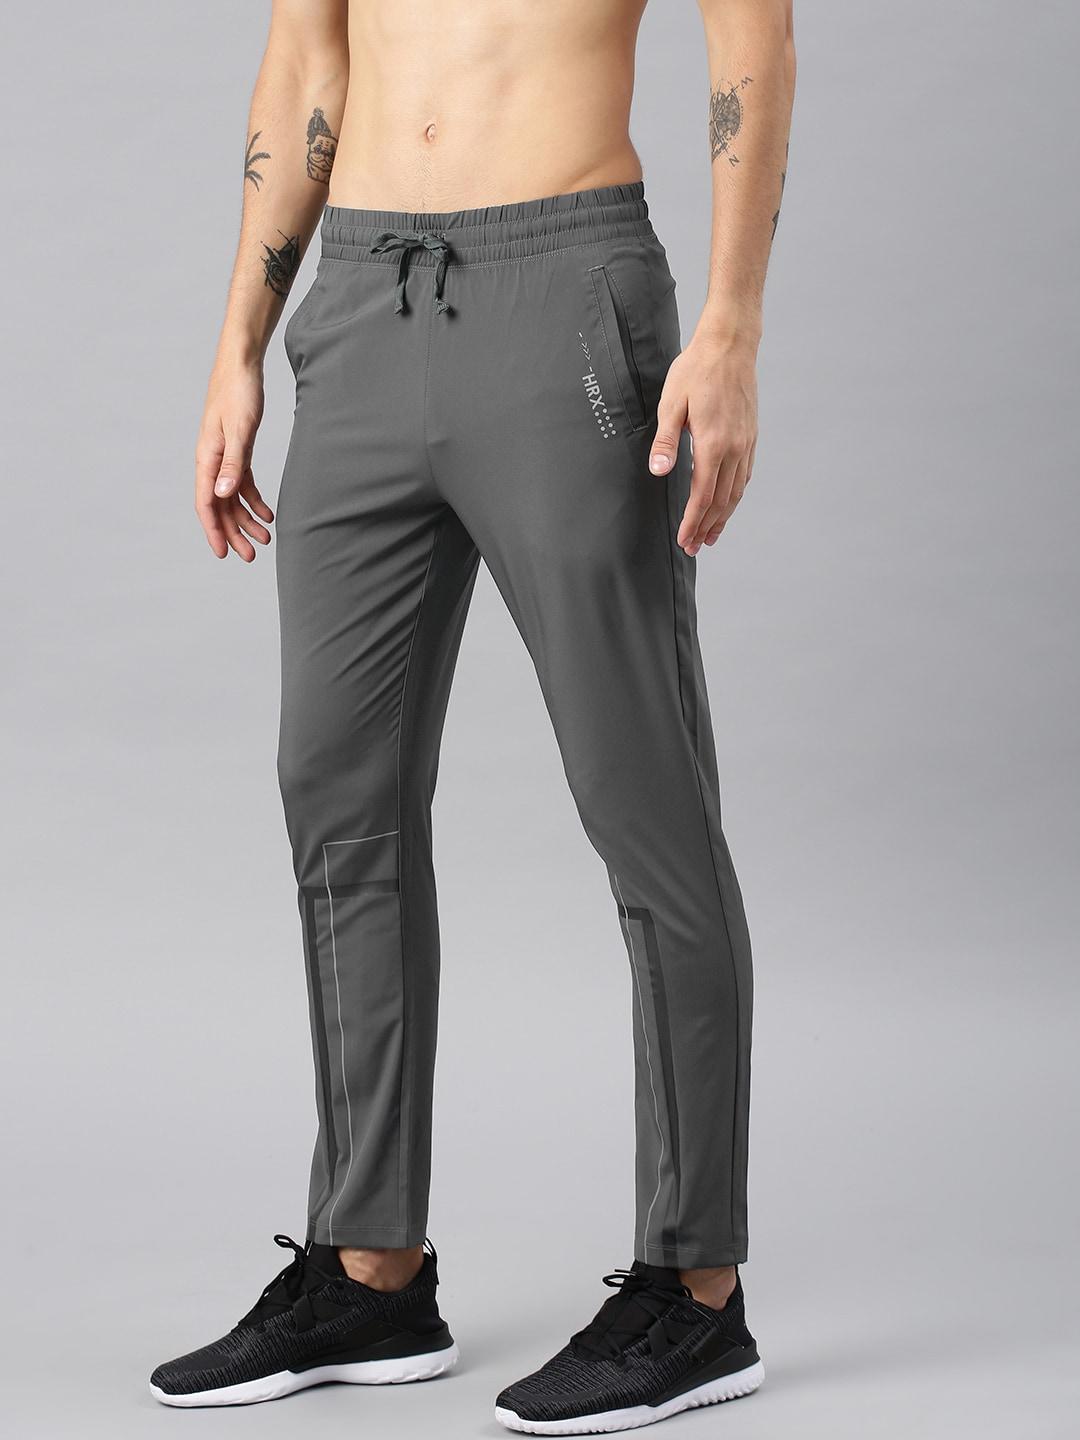 hrx-by-hrithik-roshan-active-men-charcoal-grey-solid-rapid-dry-track-pants